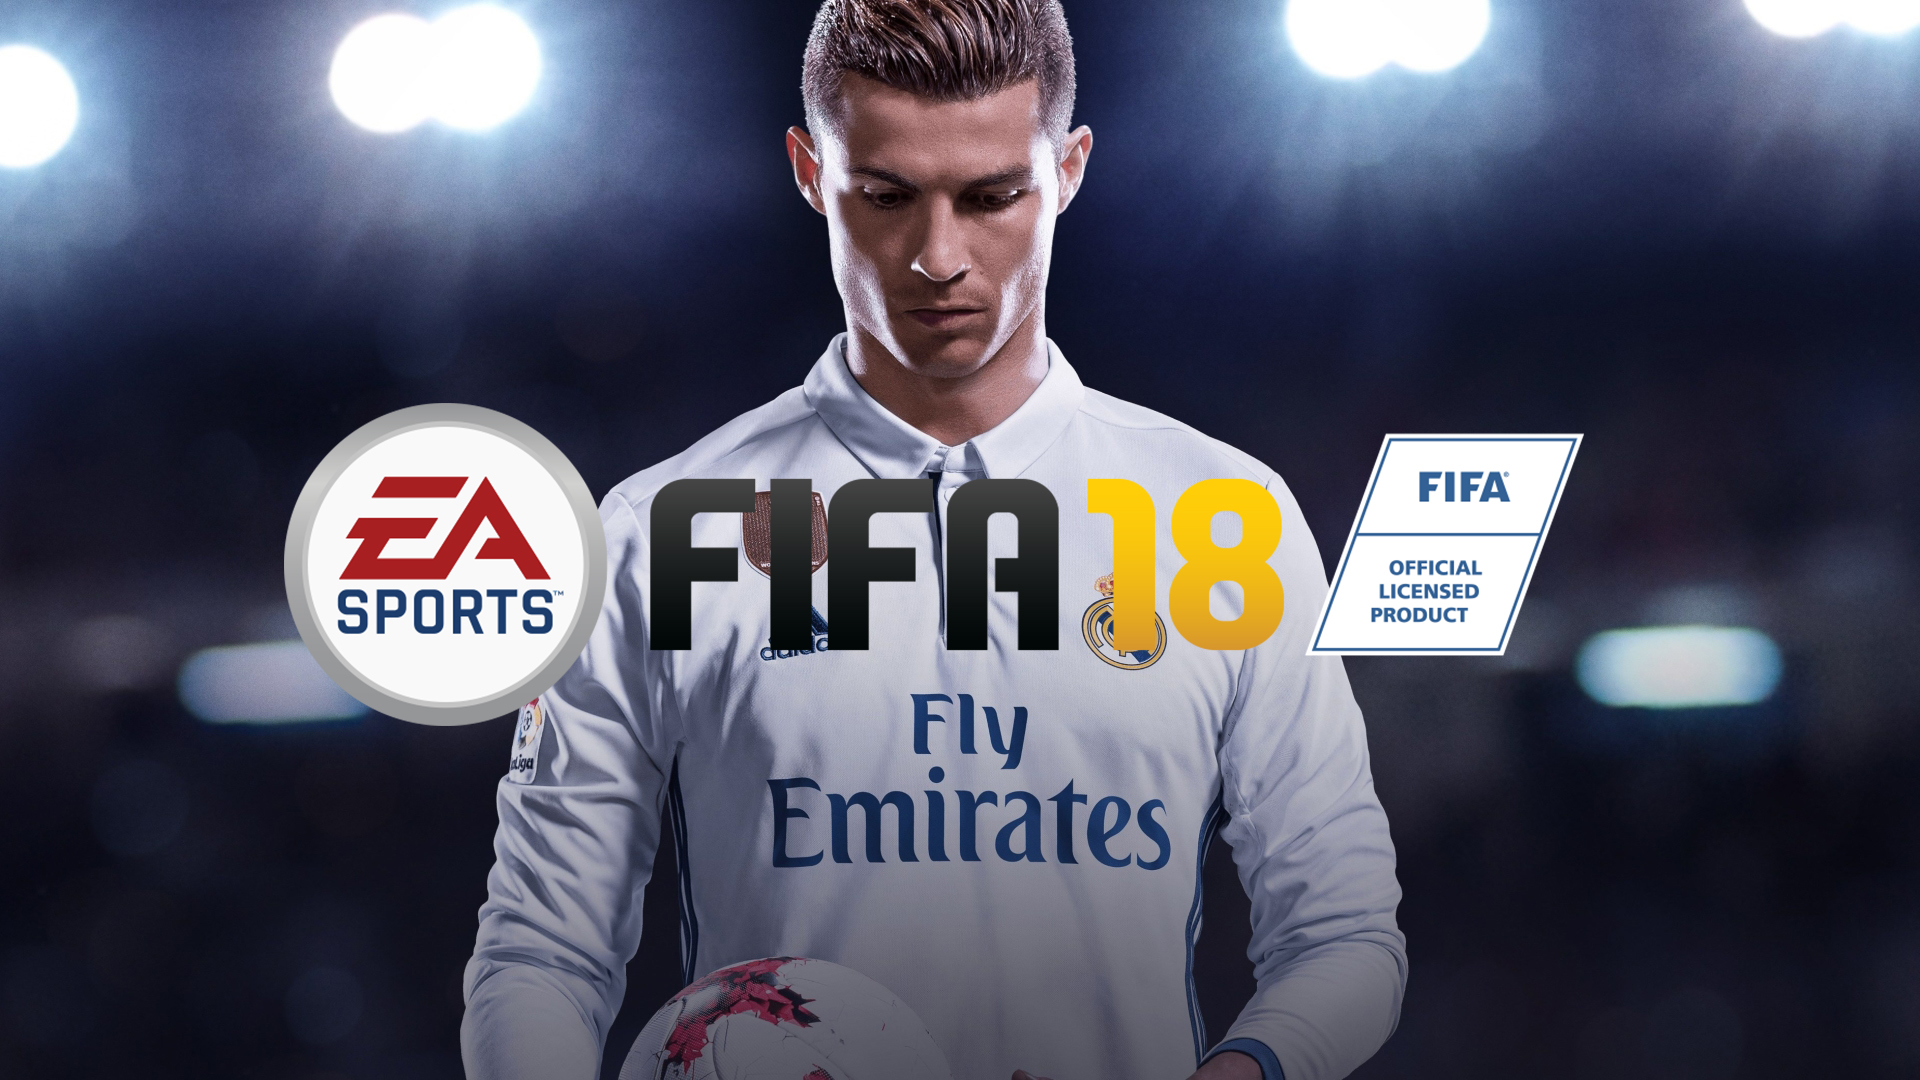 fifa 18 pc download with key